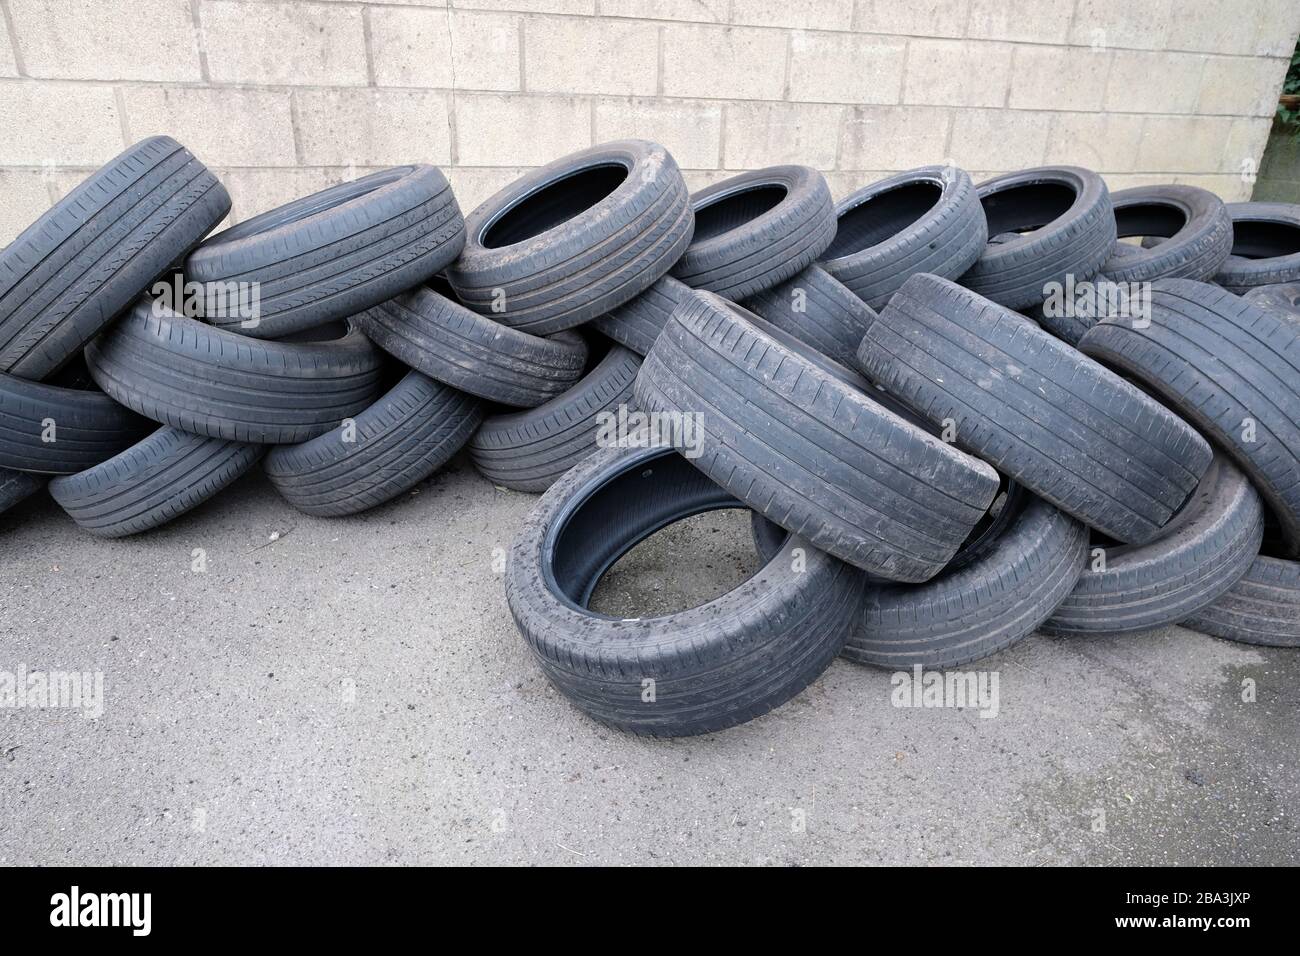 February 2020 - Old tyres stacked ready for recycling outside a garage in the Somerset village of Cheddar. Stock Photo